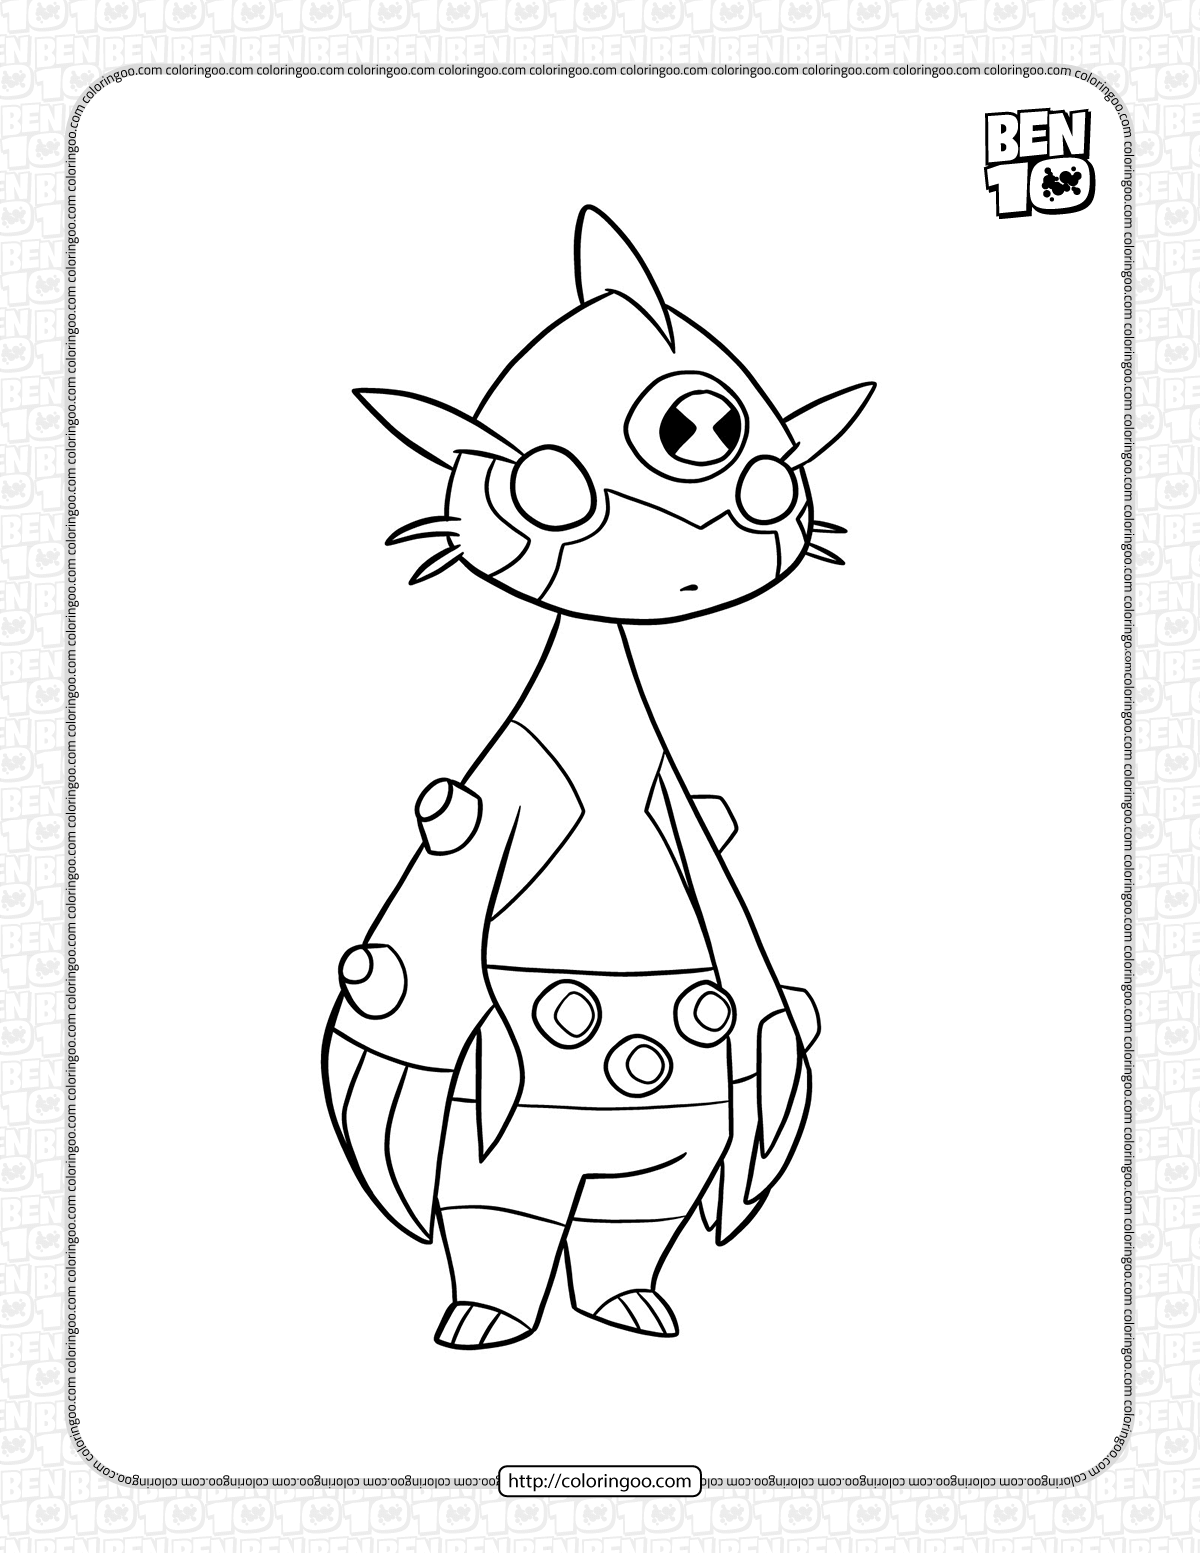 ditto omniverse classic coloring page